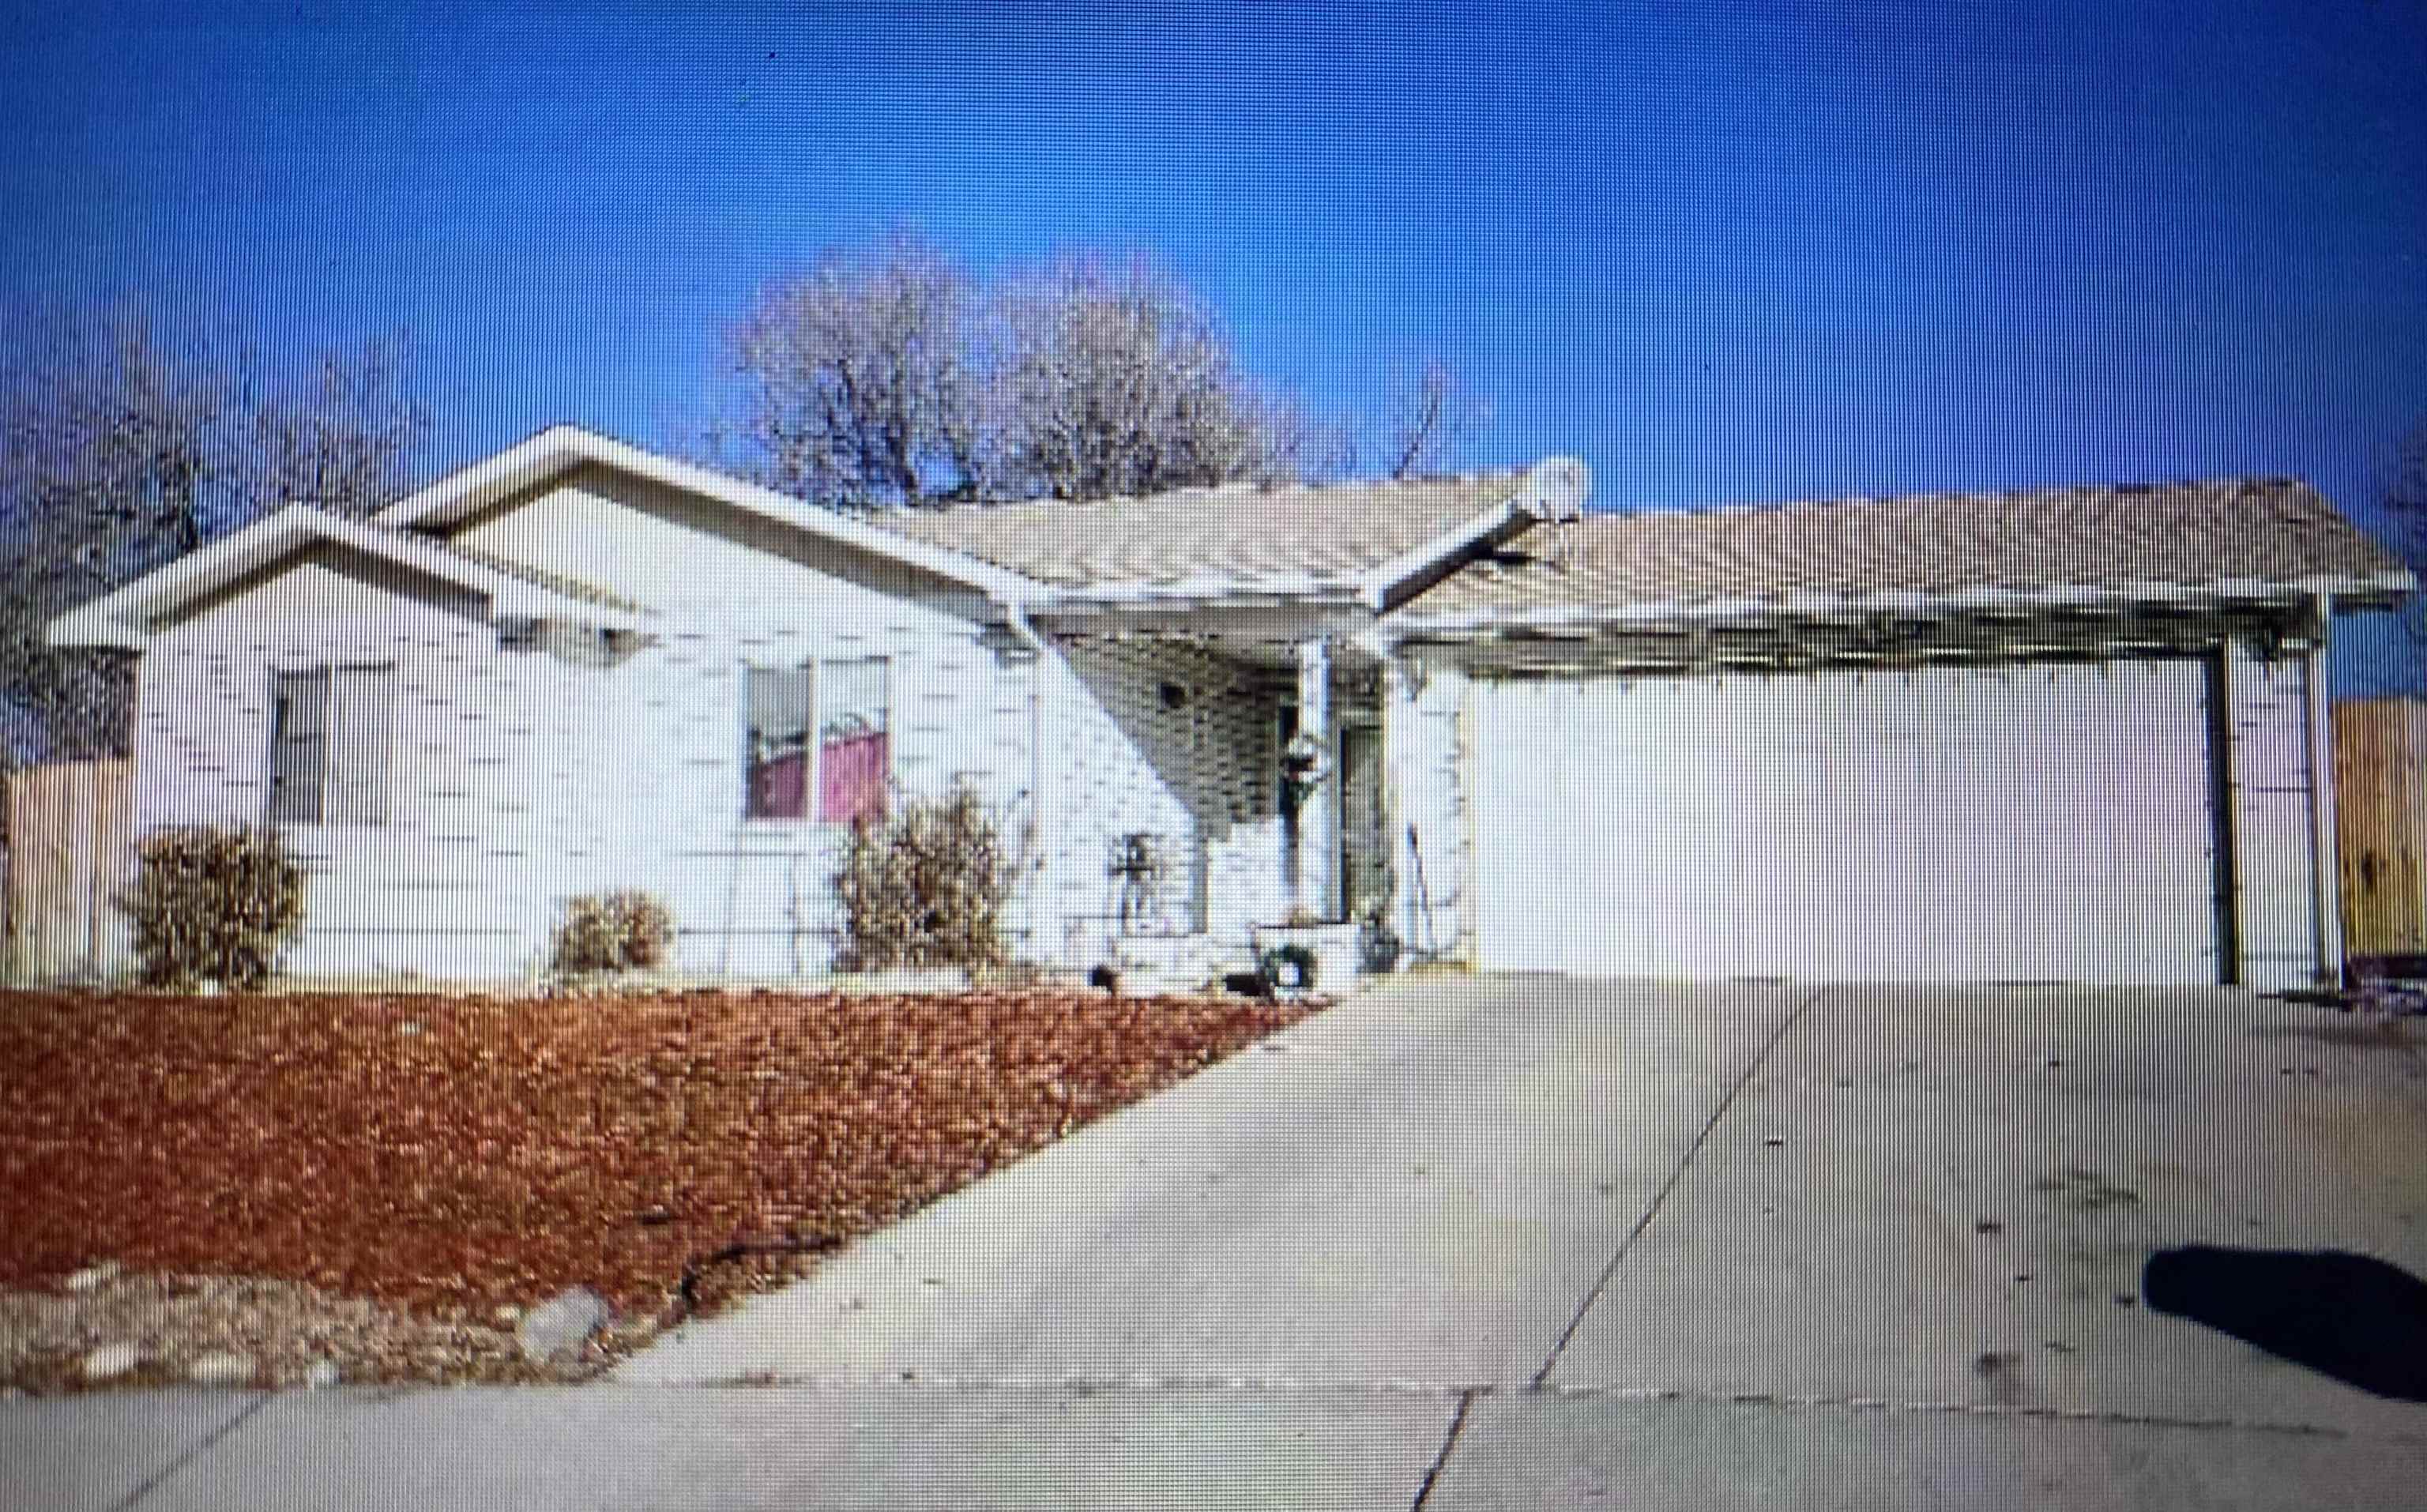 BACK ON THE MARKET! MOTIVATED SELLER!! 4/2/2 in quiet OM neighborhood! Large yard and in a cul de sac. Cute floor plan in need of TLC. 4 bedroom house- 4th bedroom is non-conforming and attached to master suite with backyard access. So many possibilities! House is a fixer and price reflects that. Go and Show.